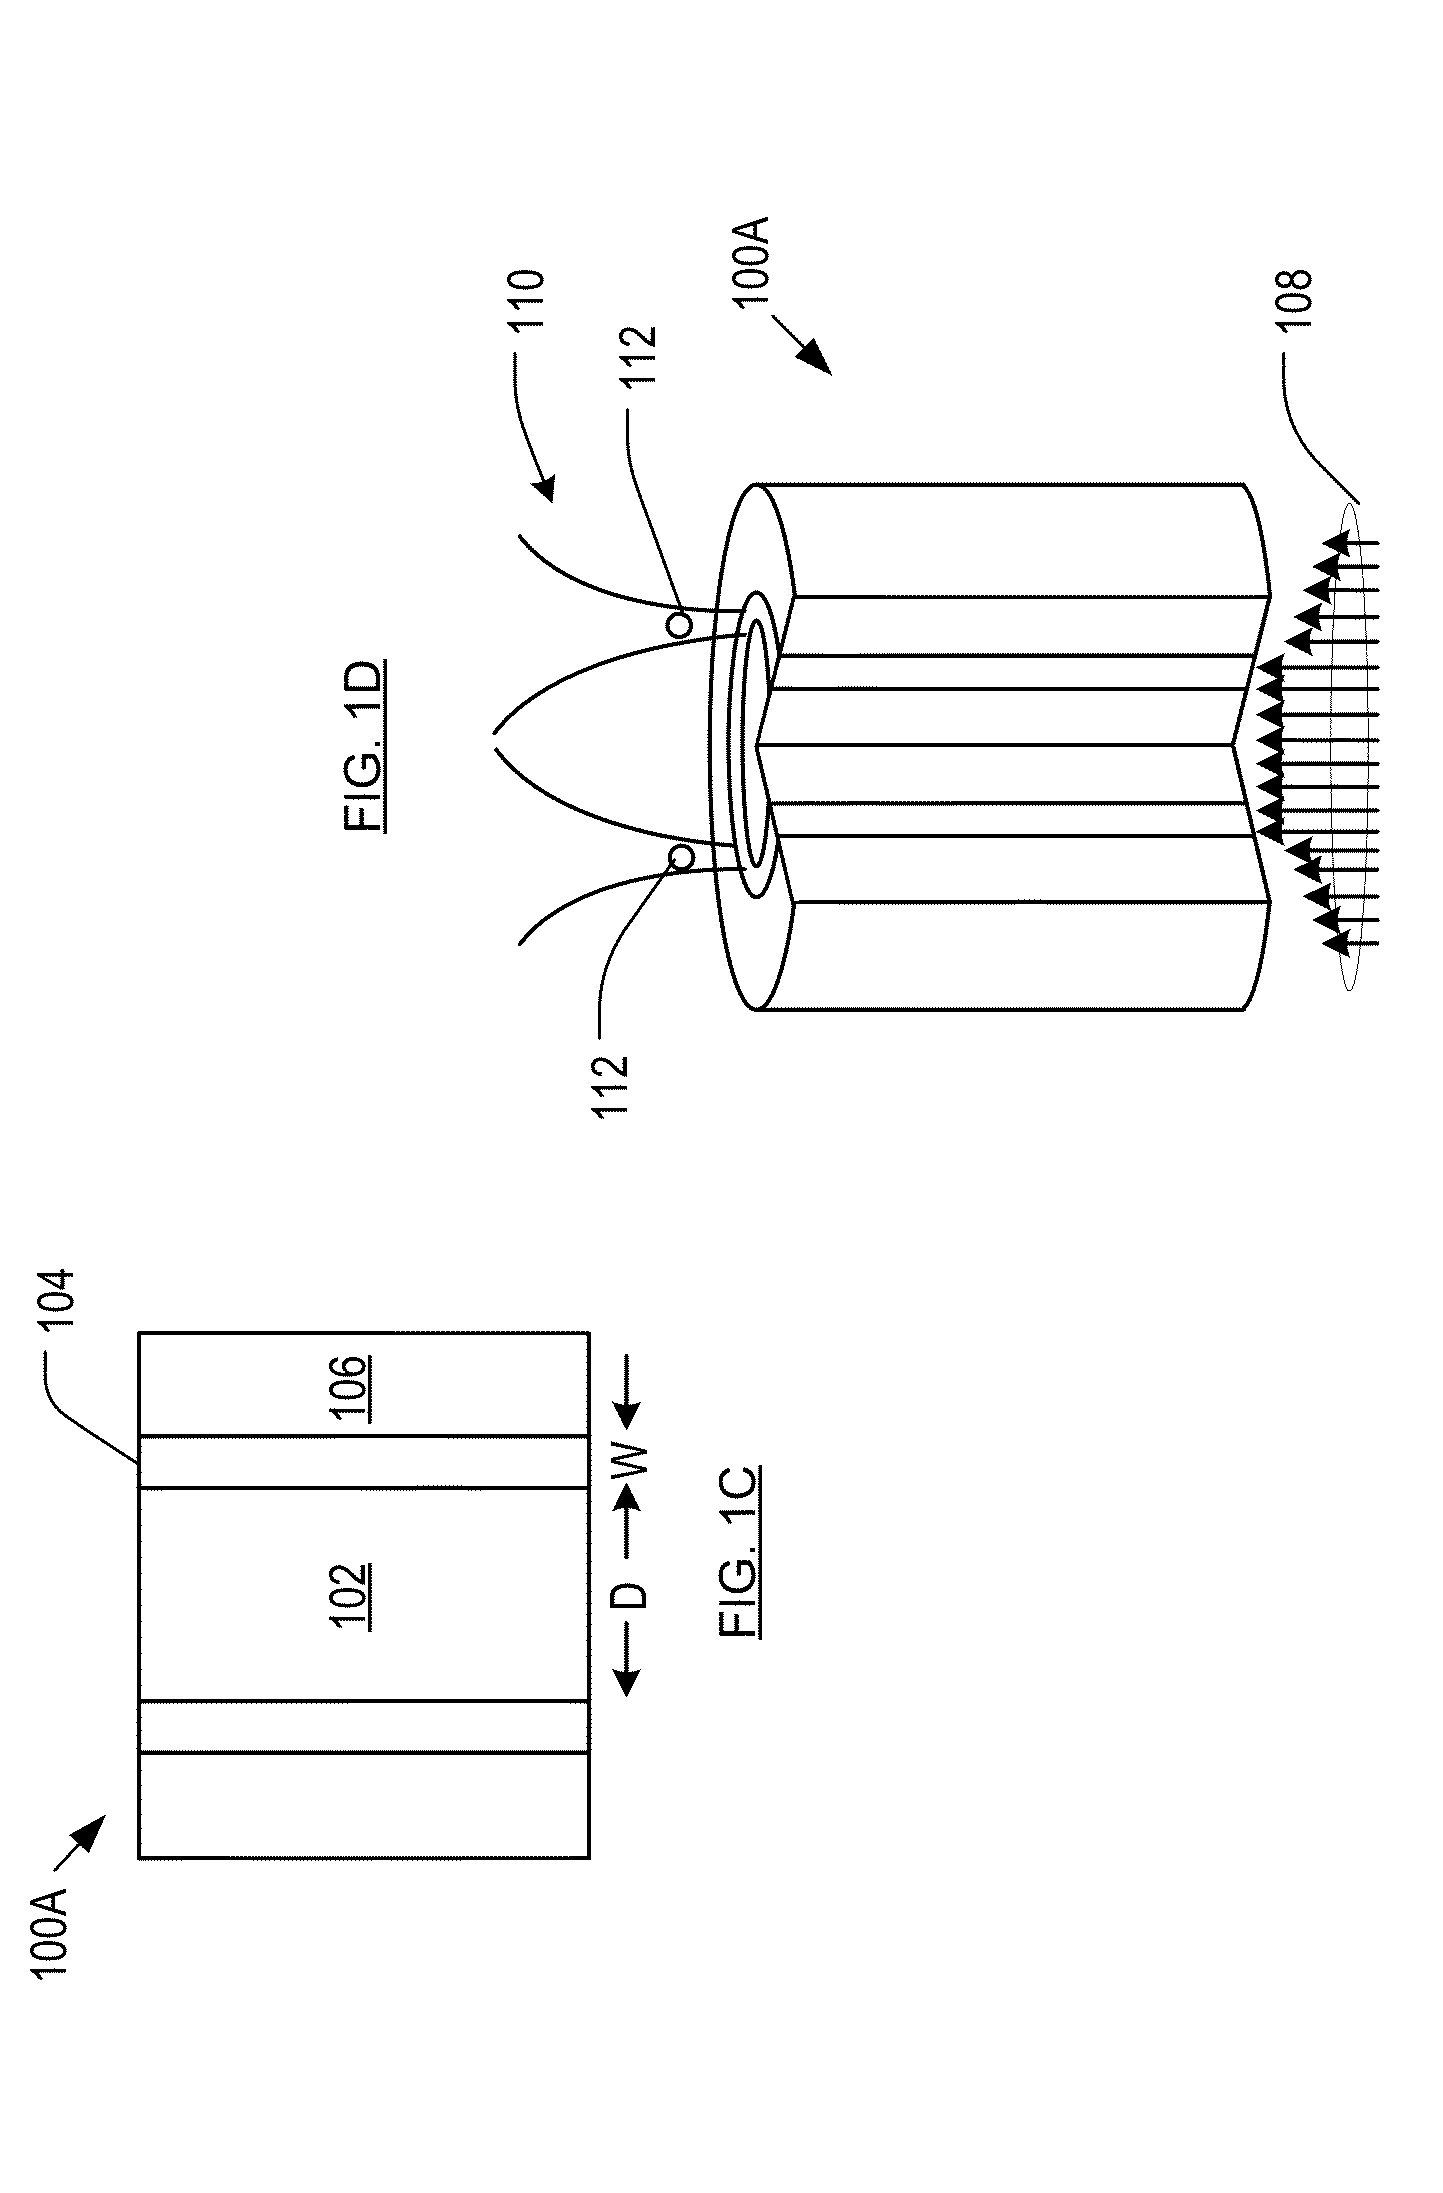 Method and structure for plasmonic optical trapping of nano-scale particles